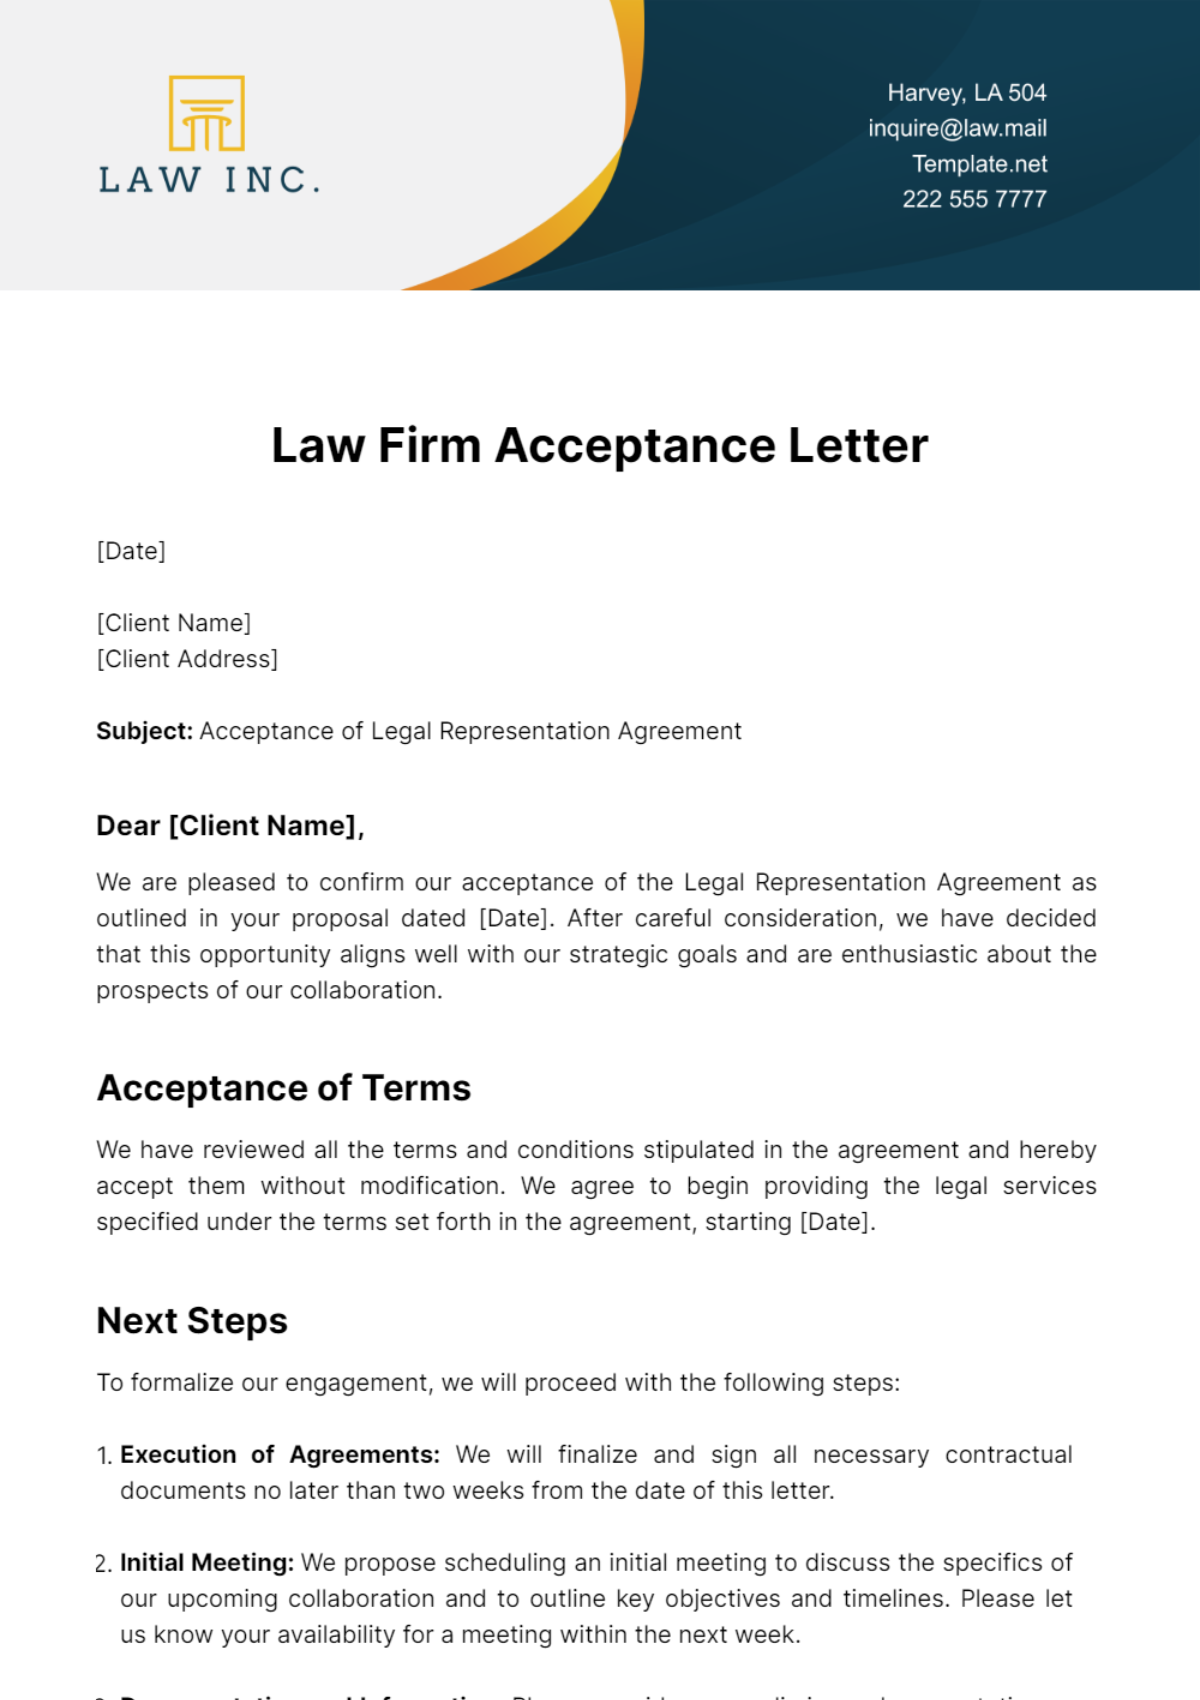 Law Firm Acceptance Letter Template